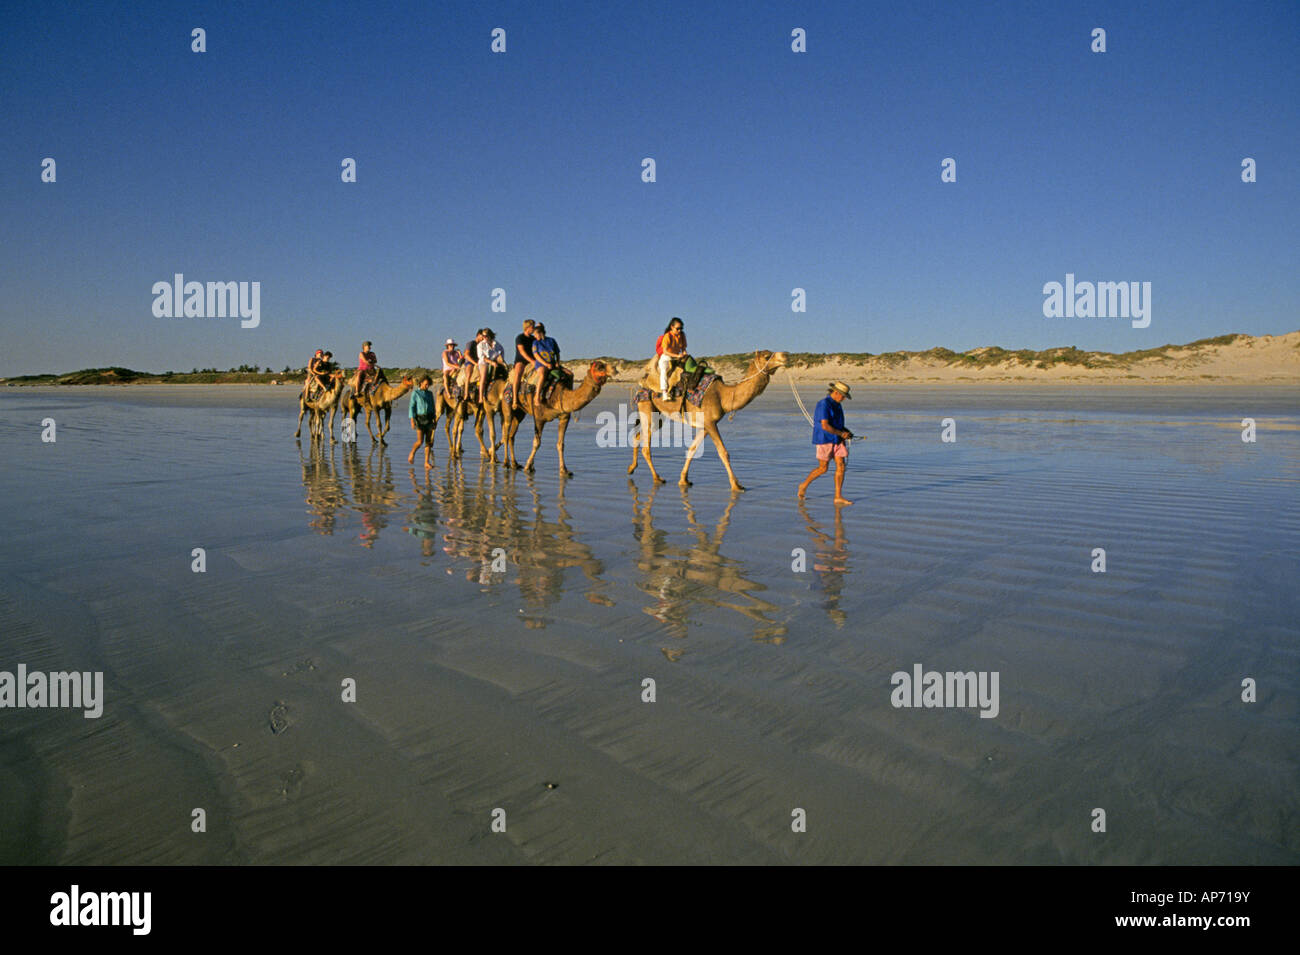 Visitors take a camel trek along the beach near the Western Australia town of Broome Stock Photo